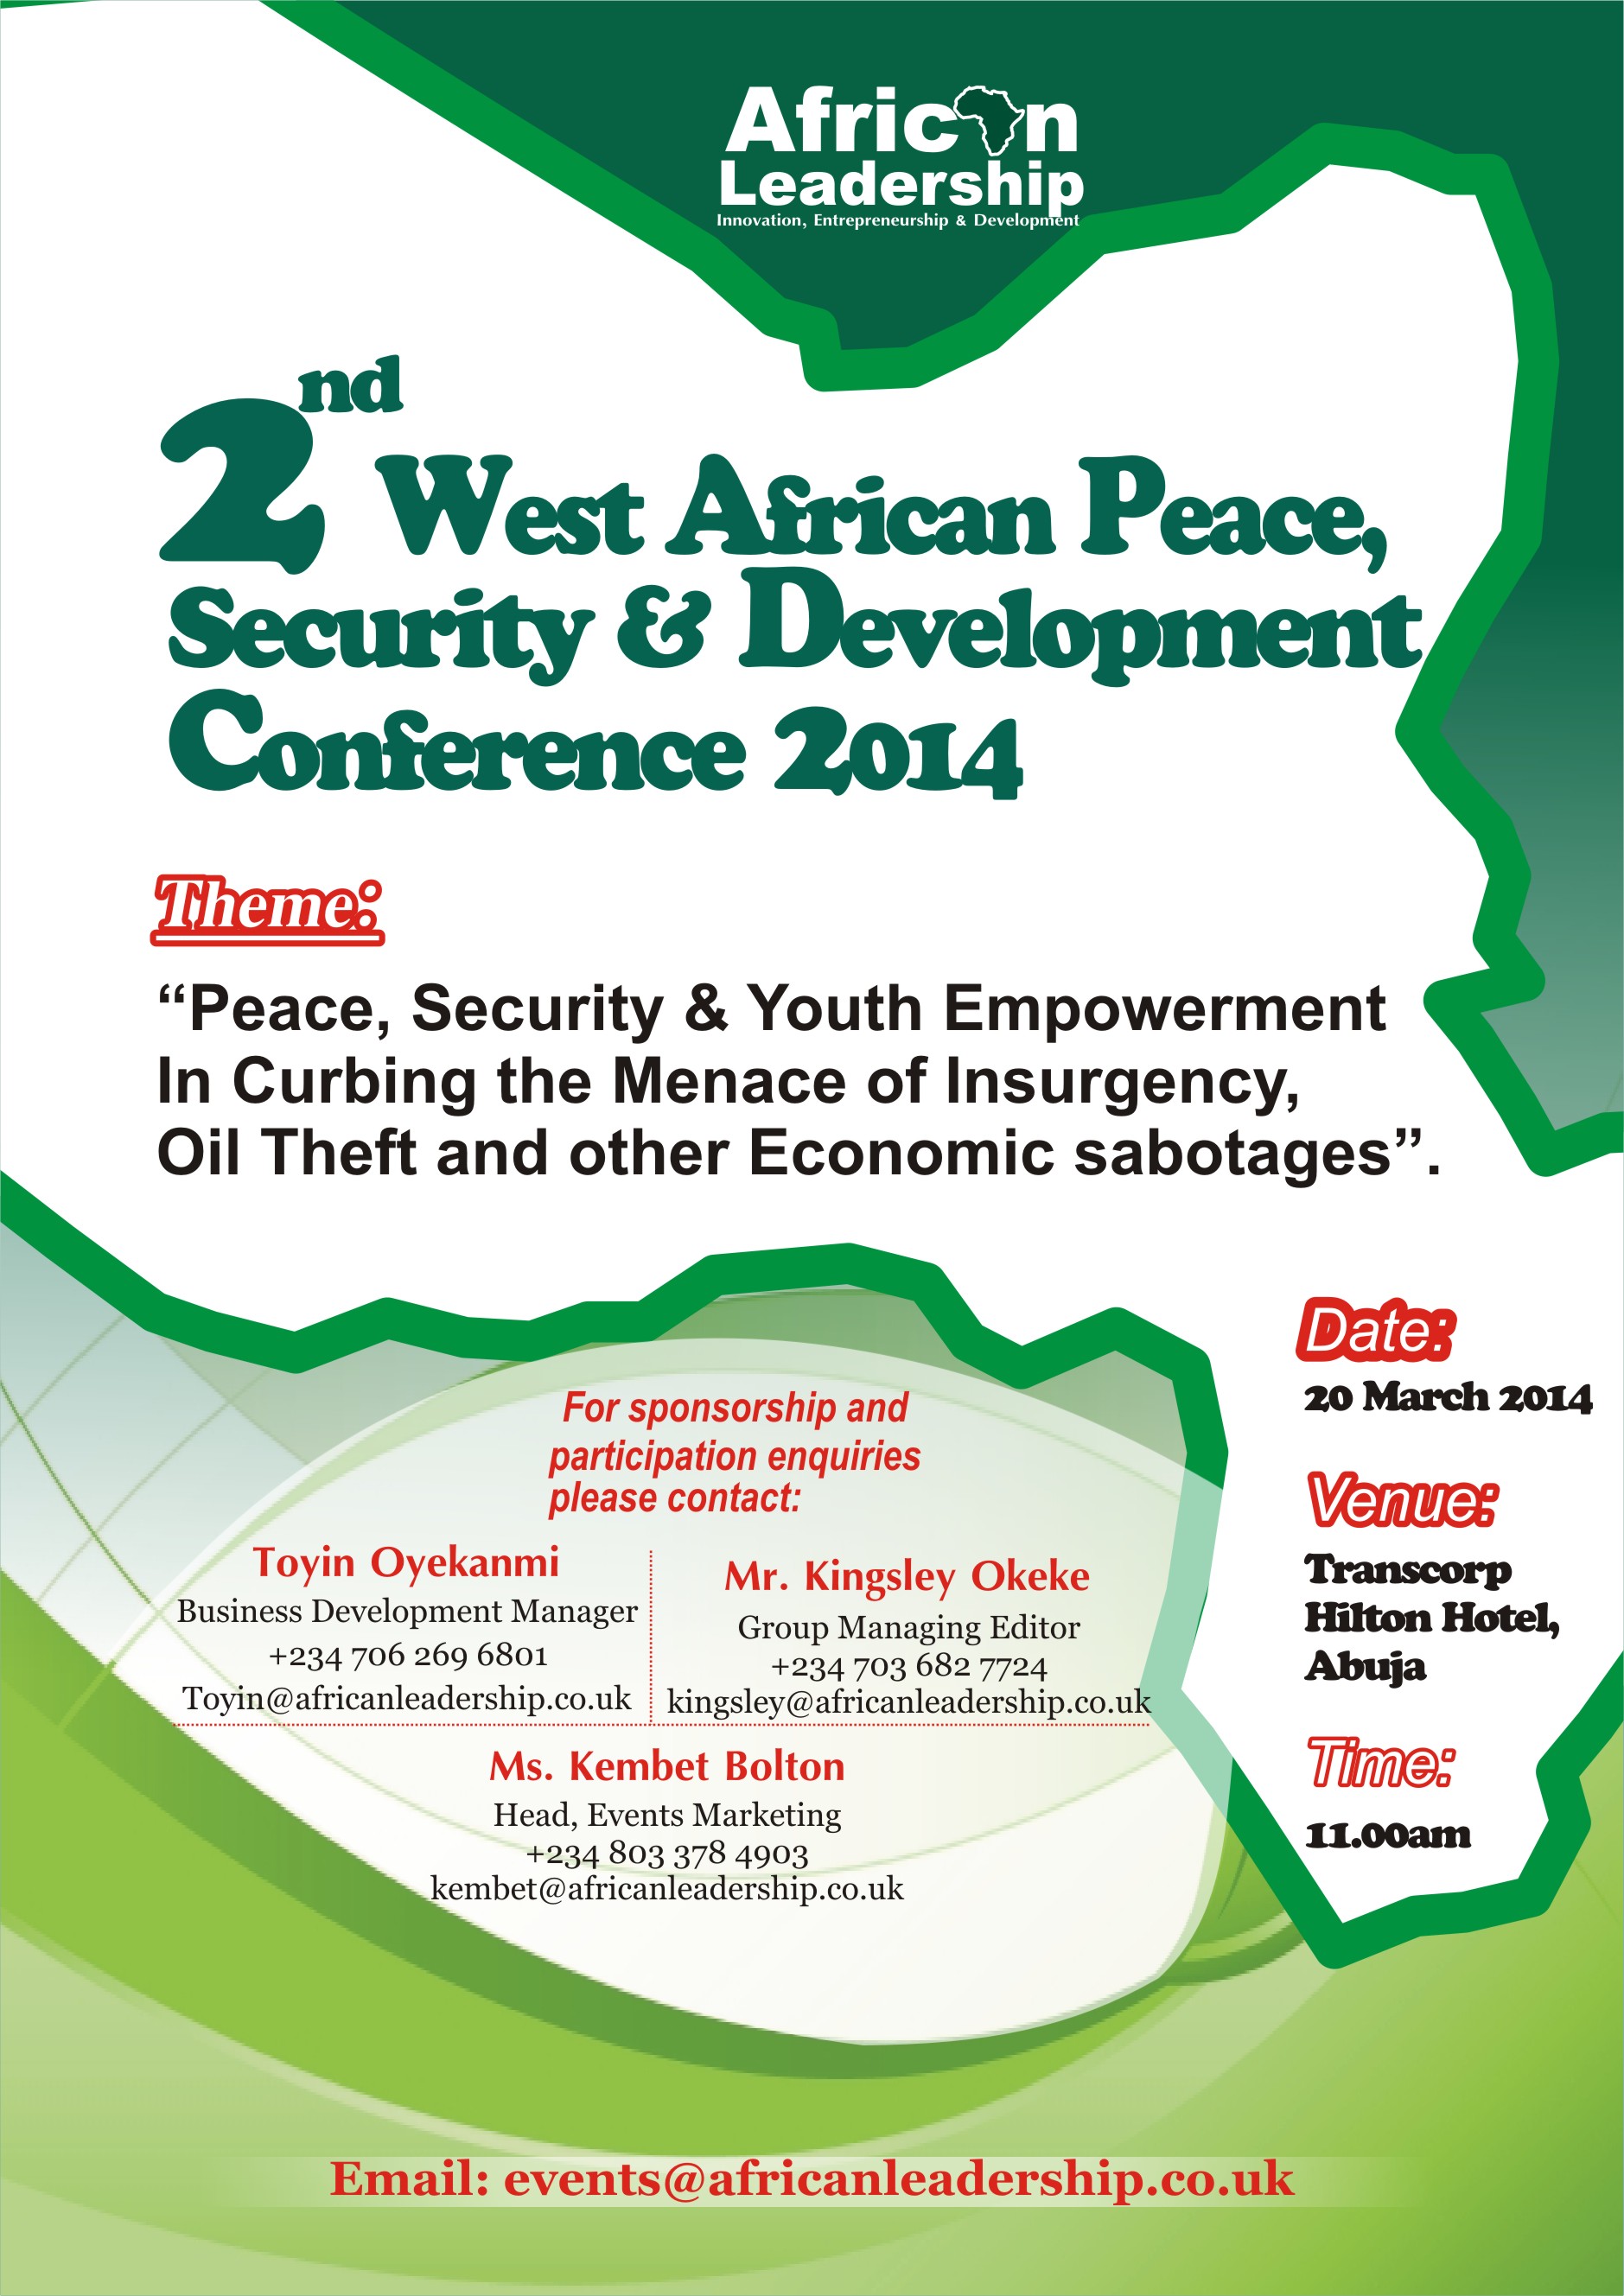 2nd West African Peace, Security & Development Conference 2014